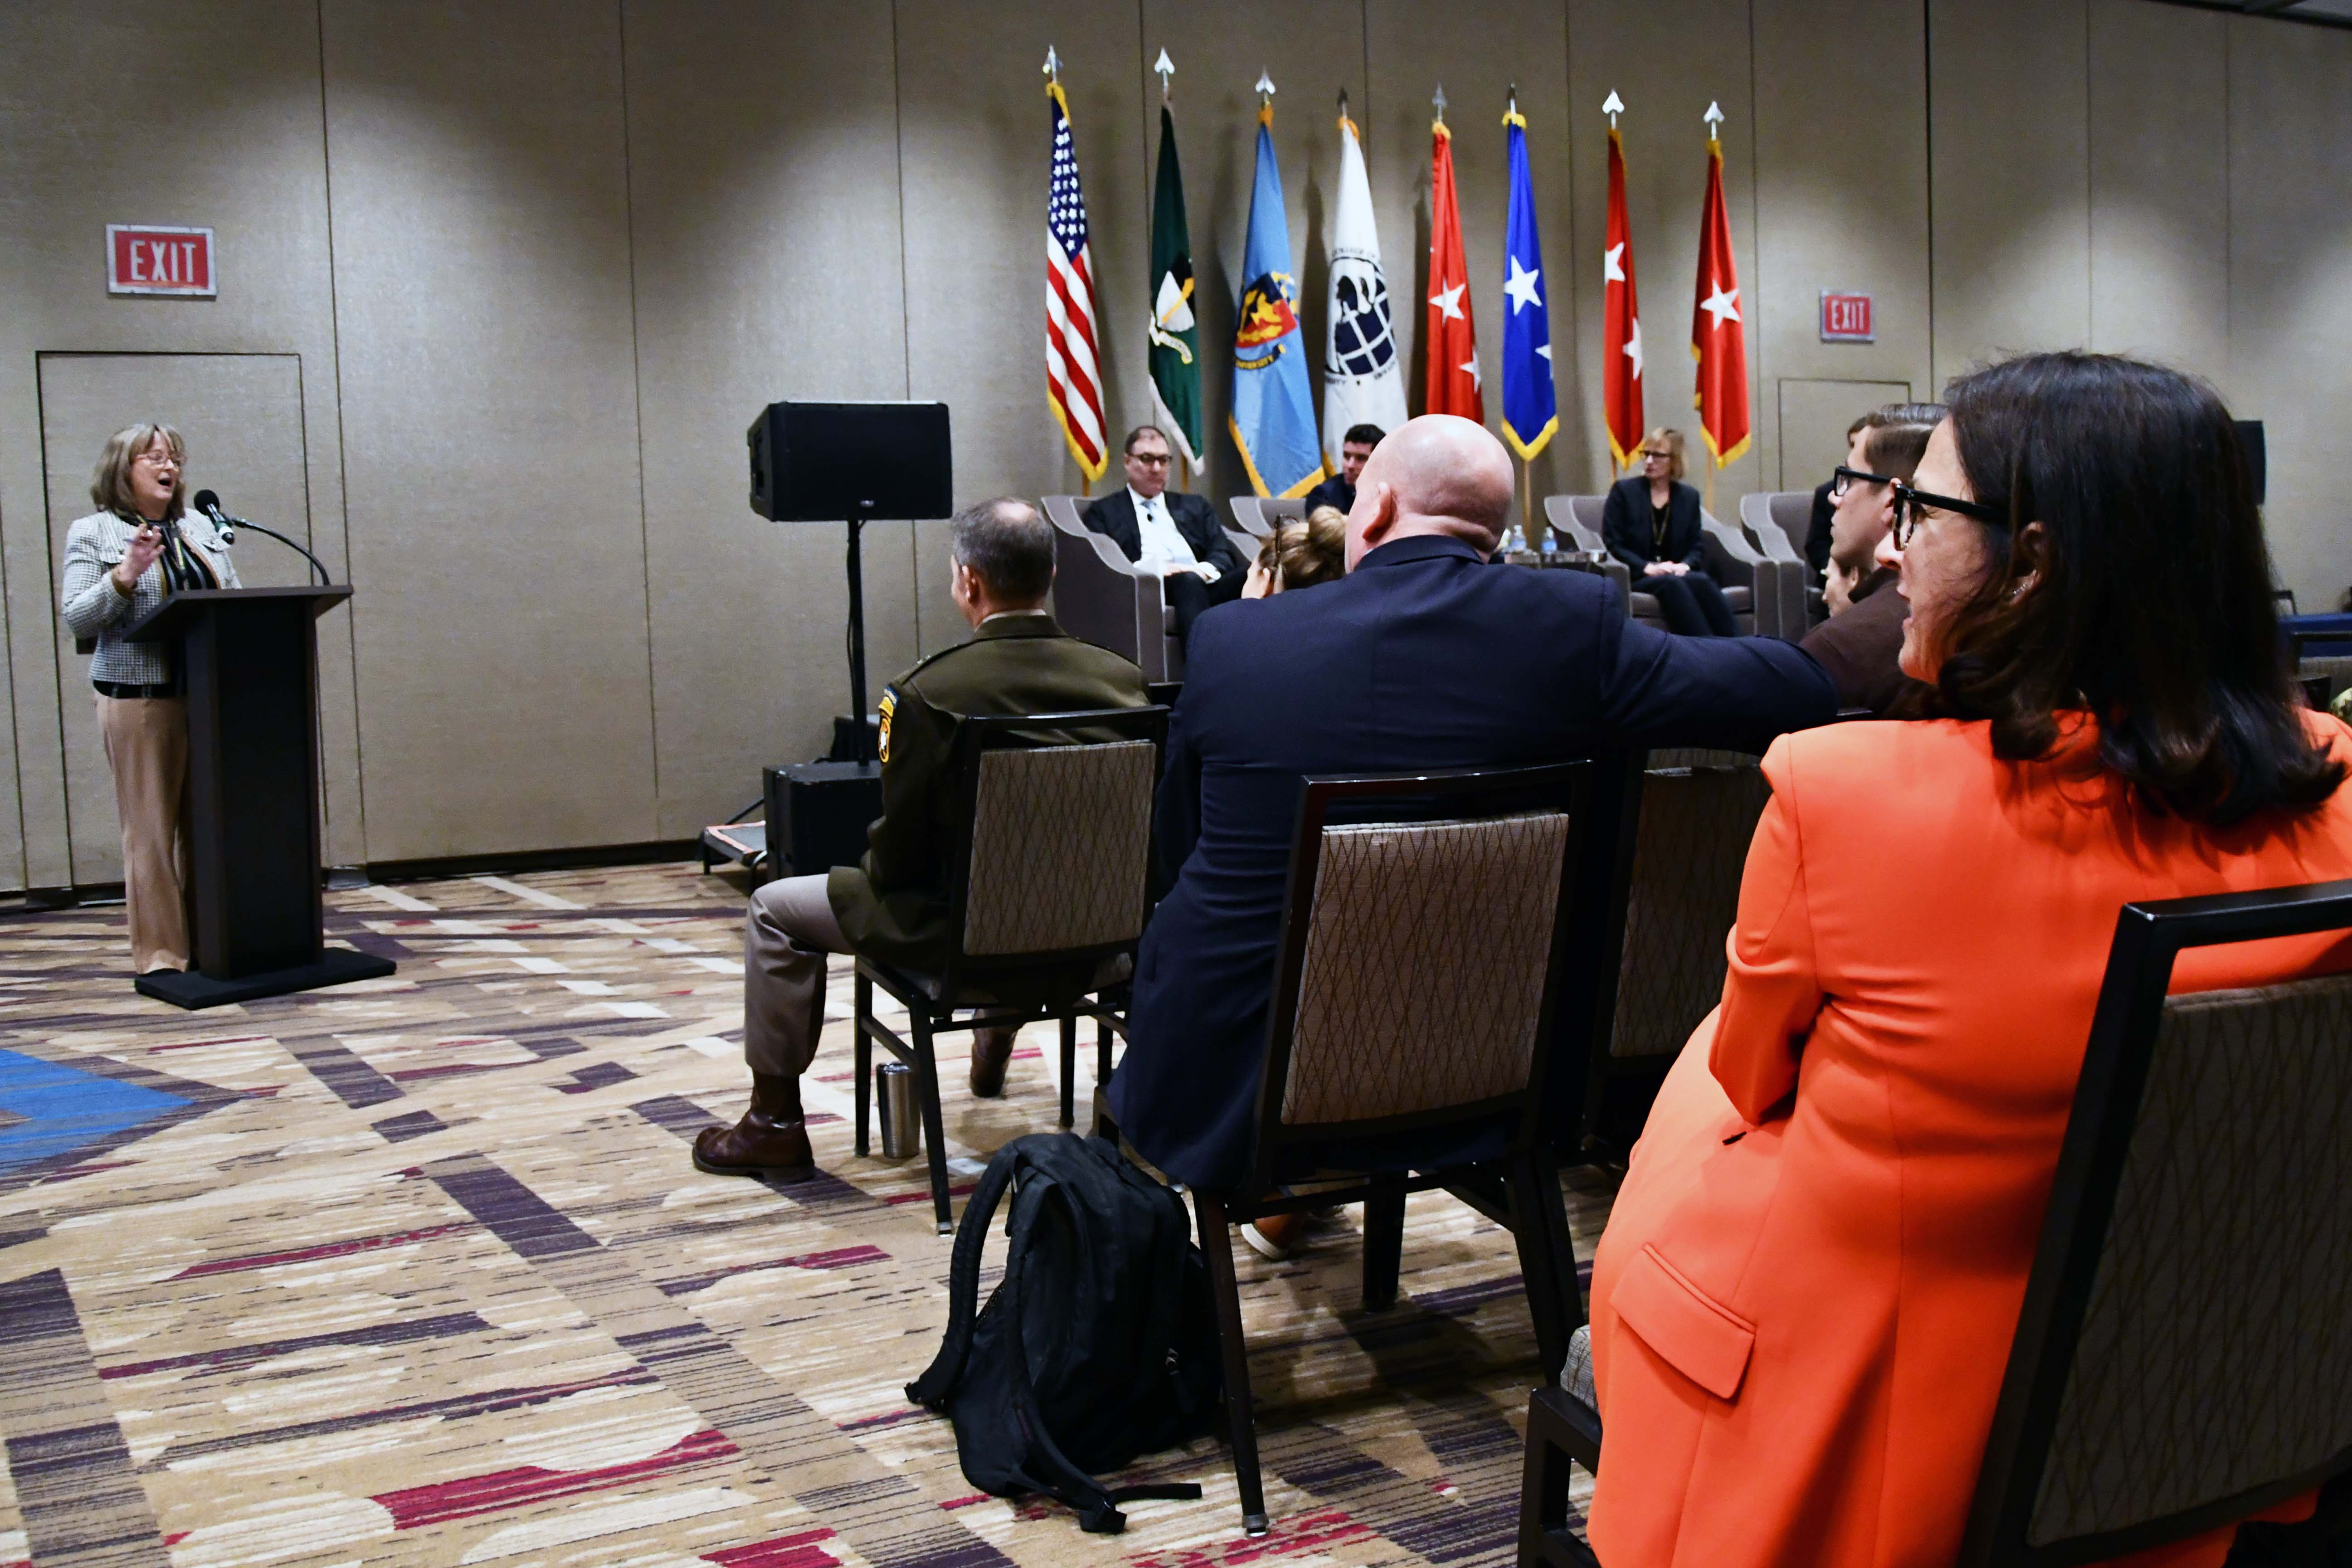 Jointly hosted Irregular Warfare Forum provides critical discussion on IW policy, doctrine, training, education